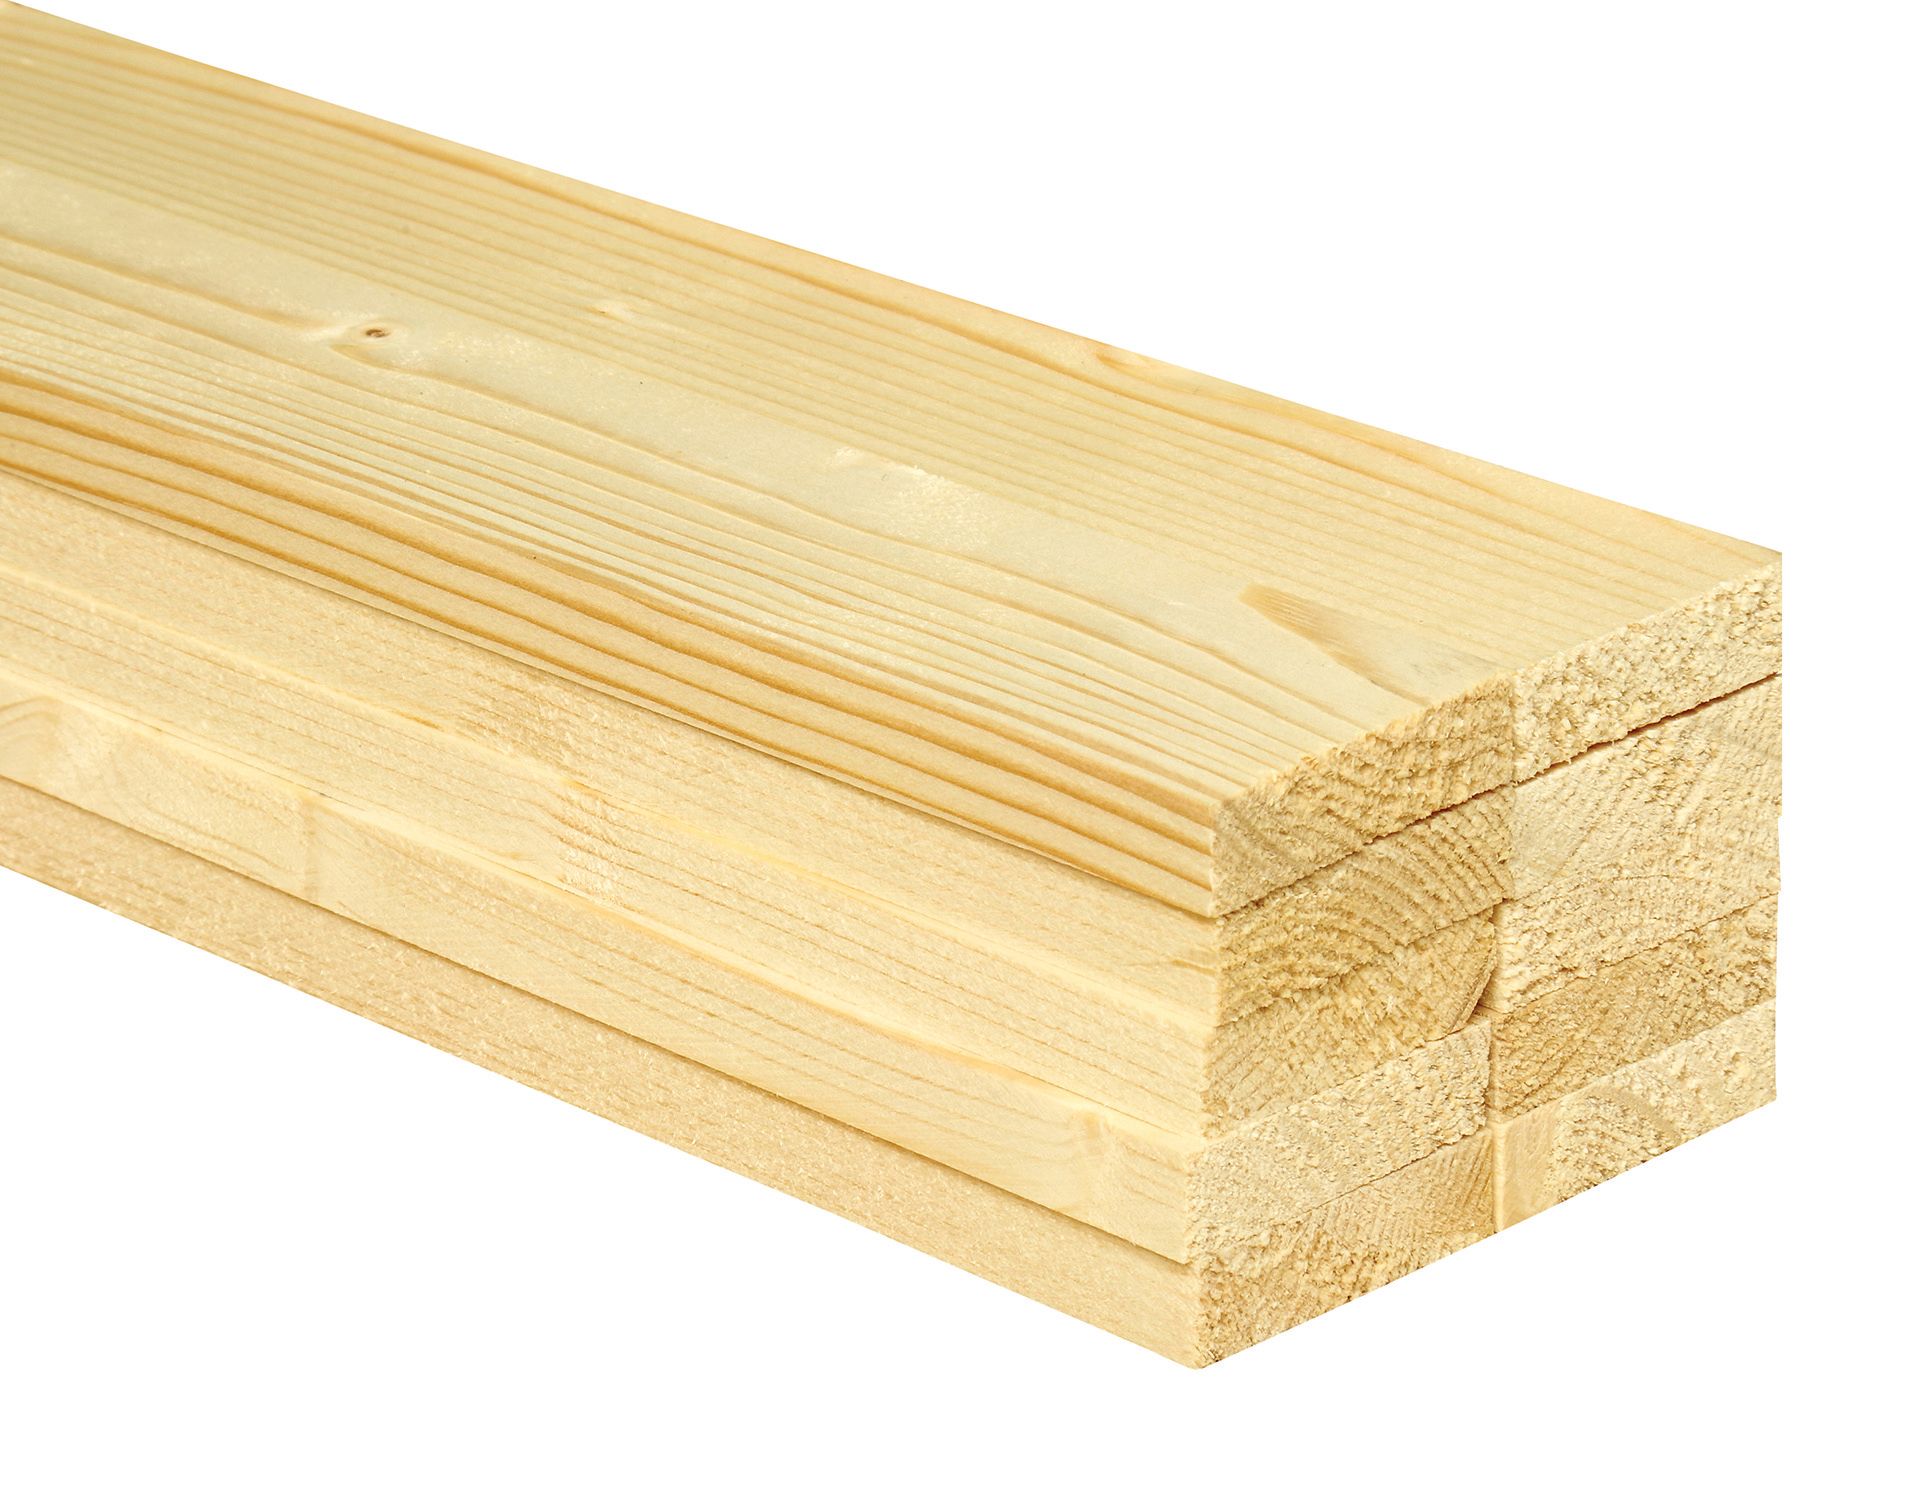 Wickes Whitewood PSE Timber - 12 x 44 x 2400mm - Pack of 10